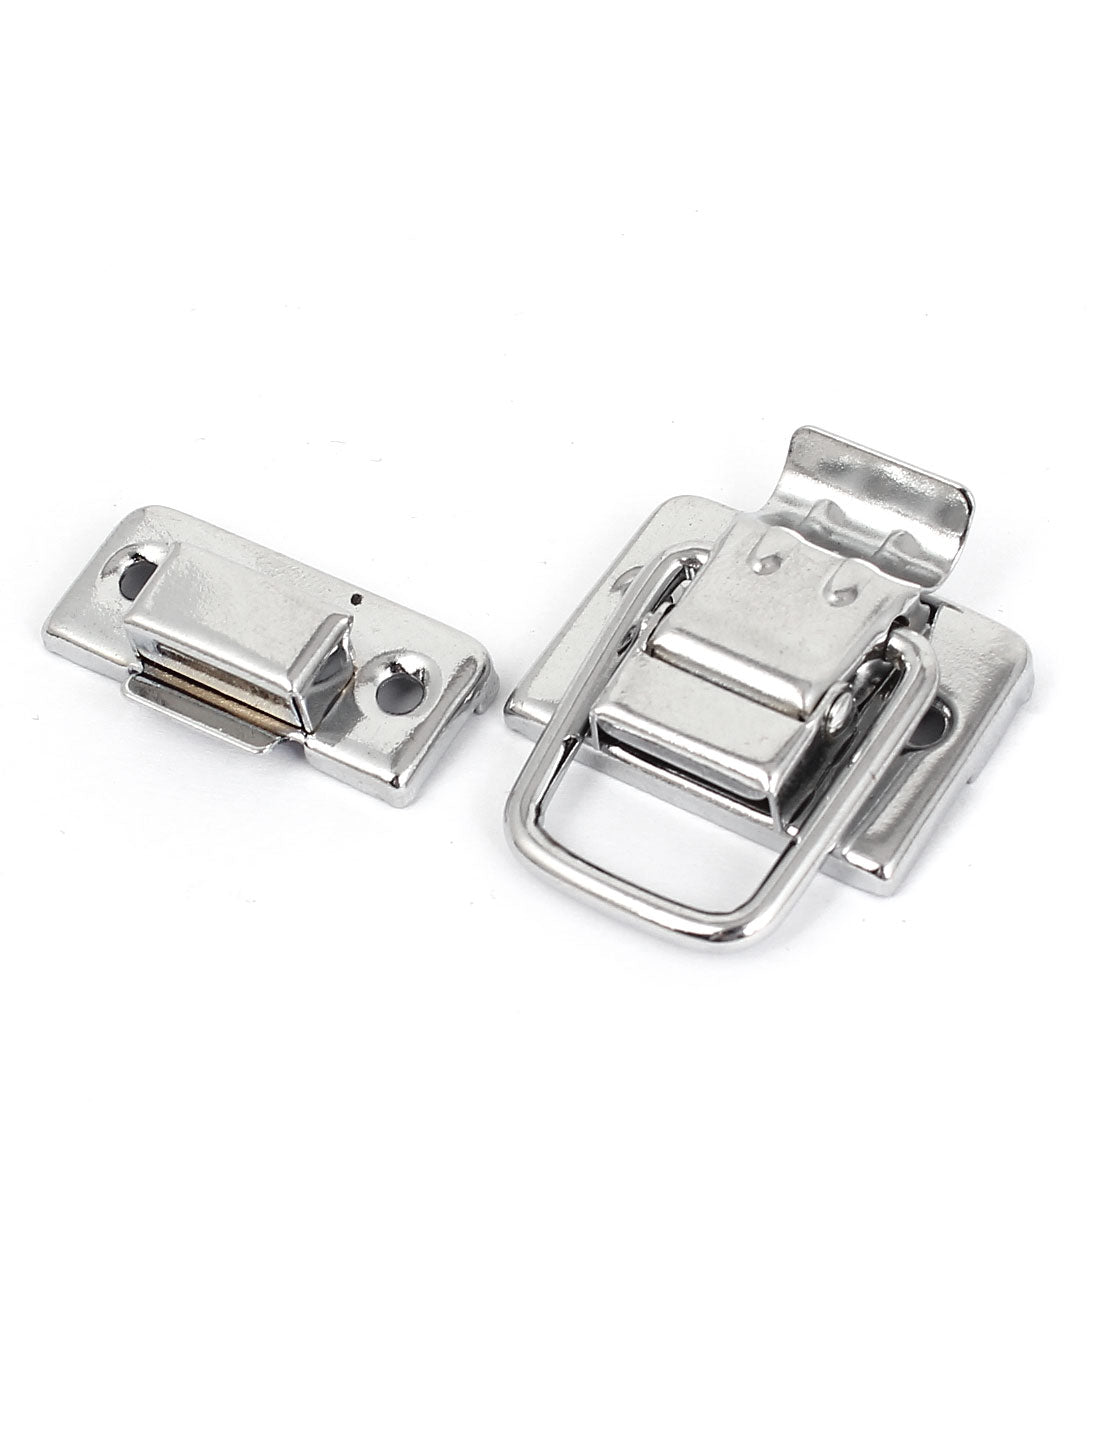 uxcell Uxcell 4 Pcs Toggle Catch Latch Case Trunk Chest Boxes Suitcase Clip Clasp Trinket Tool